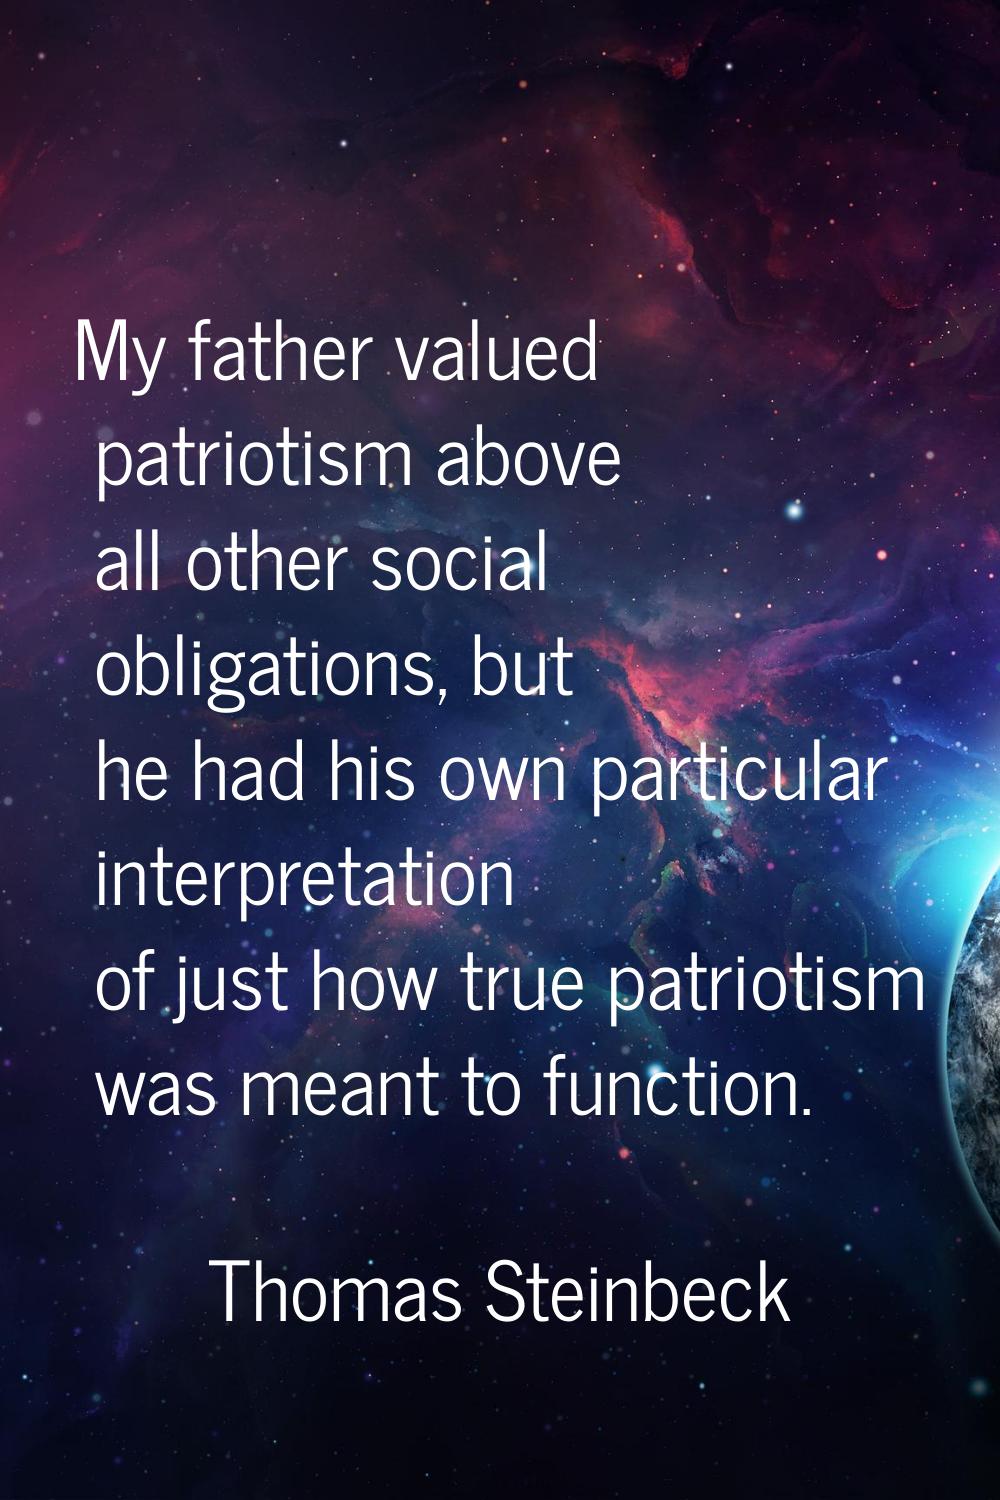 My father valued patriotism above all other social obligations, but he had his own particular inter